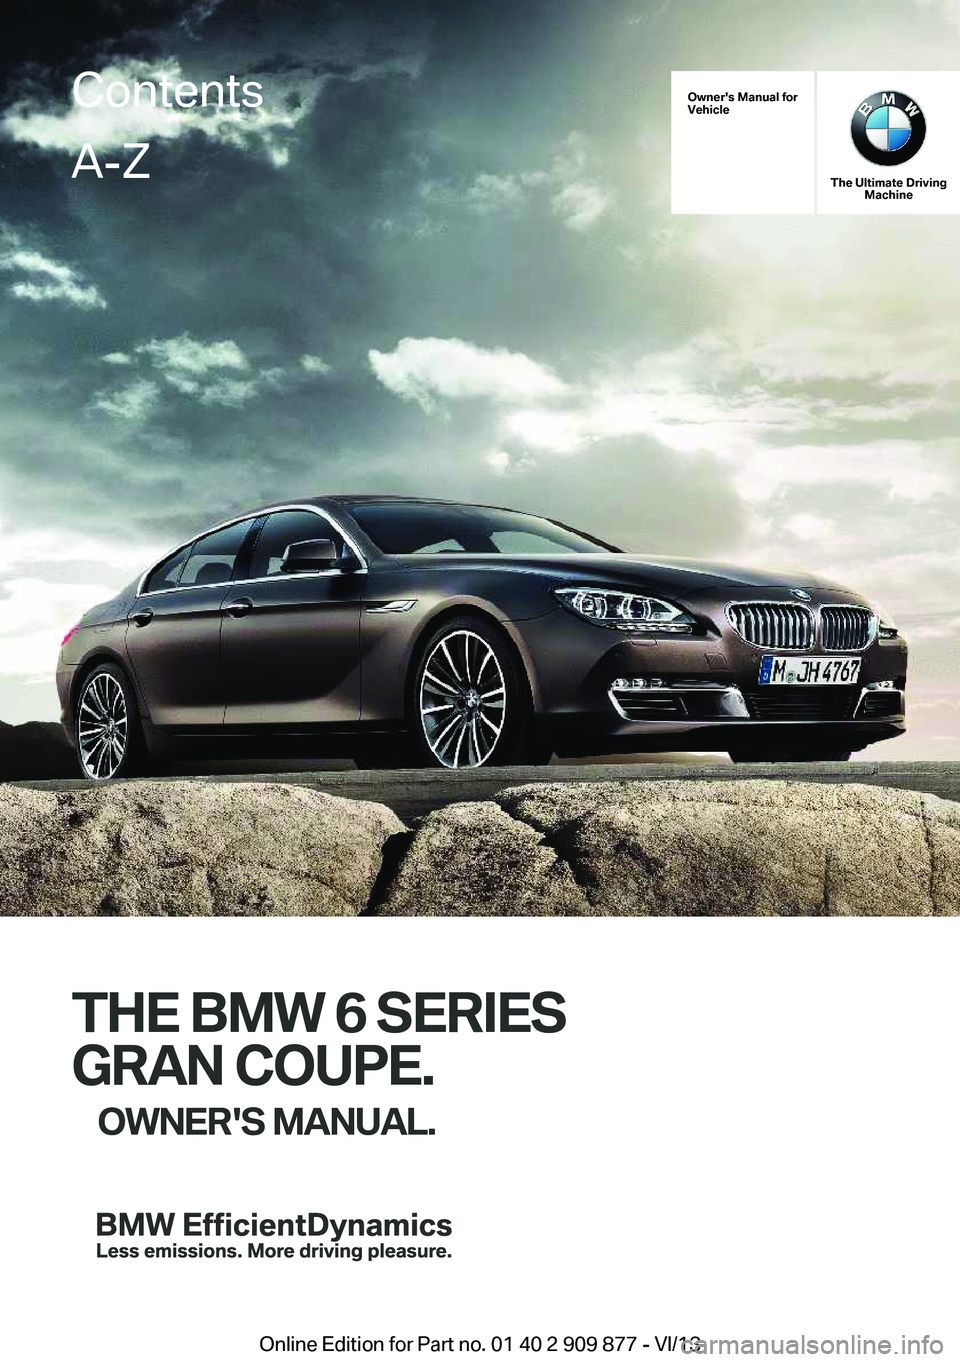 BMW 650I XDRIVE GRAN COUPE 2014  Owners Manual Owner's Manual for
Vehicle
The Ultimate Driving Machine
THE BMW 6 SERIES
GRAN COUPE. OWNER'S MANUAL.
ContentsA-Z
Online Edition for Part no. 01 40 2 909 877 - VI/13   